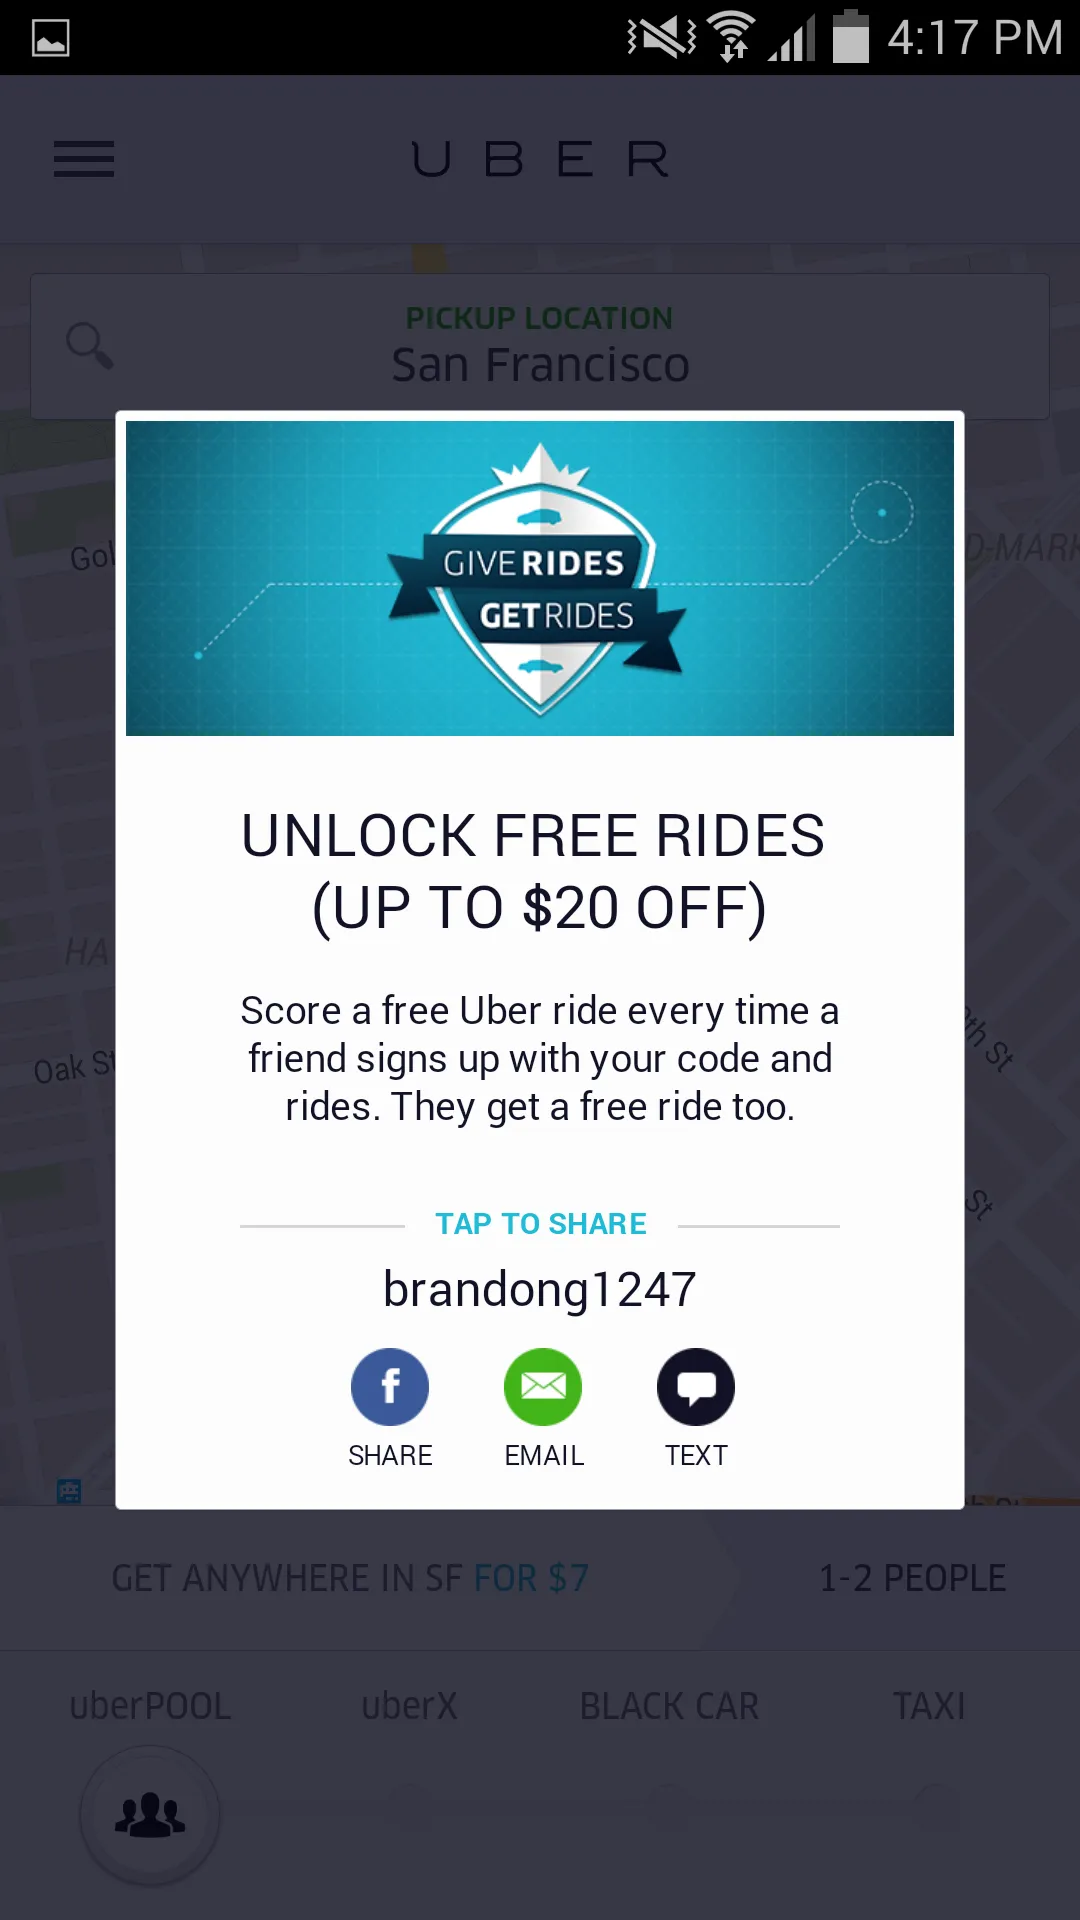 Screenshot of Uber's referral program interstitial ad. The ad mentions that the user will be able to unlock free rides up to 20$ every time a friend signs up using the code. The code can easily be shared using Facebook, Email or SMS.